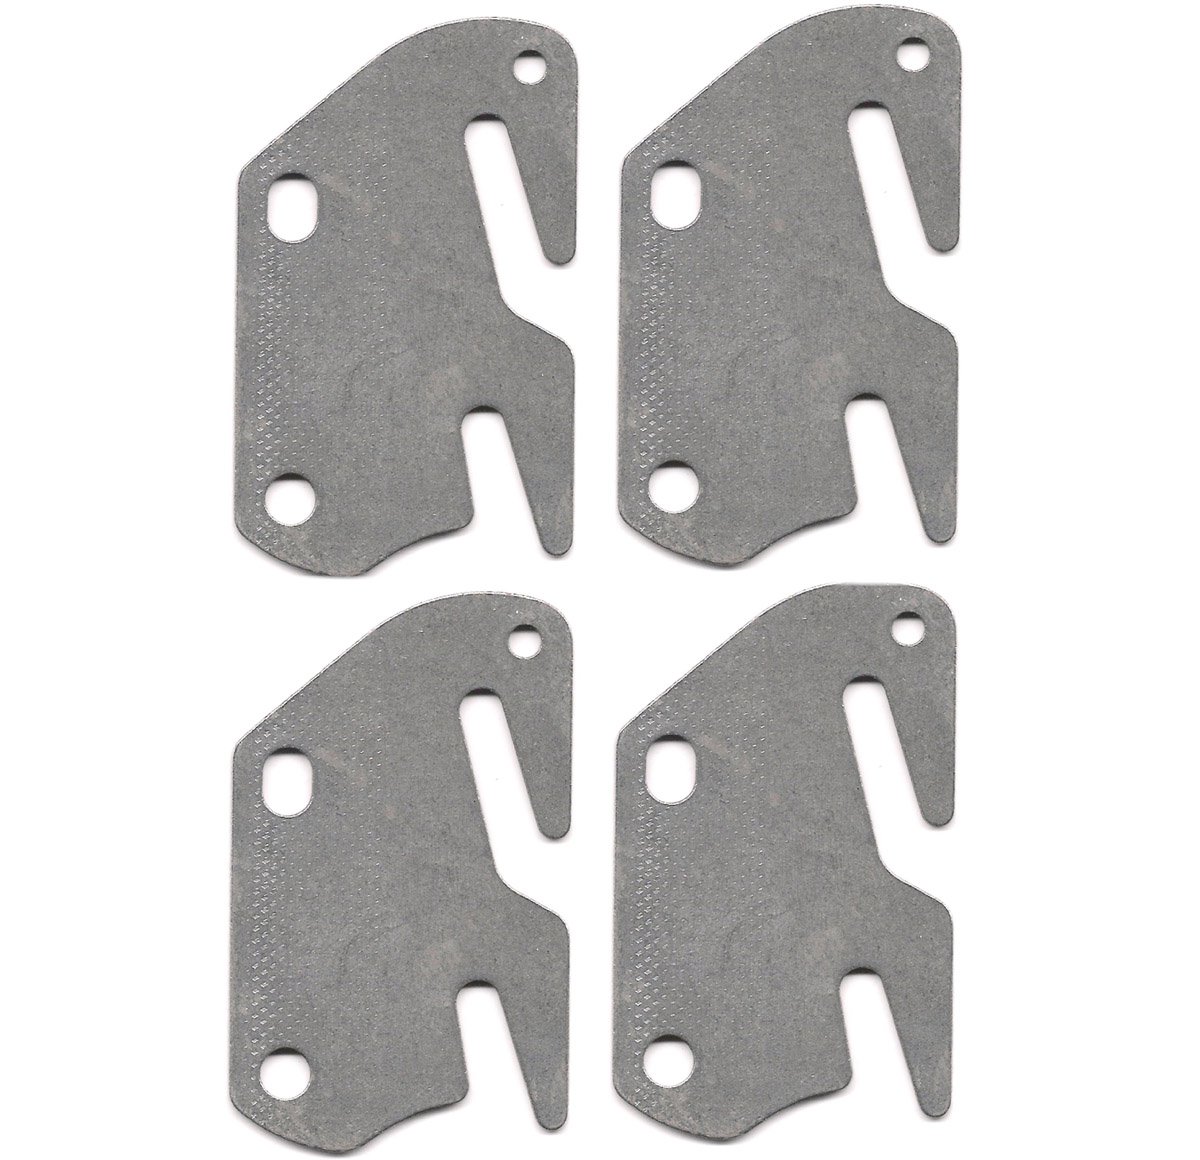 4 Bed Rail Double Hook Plates Fits 2, Bed Frame Double Hook Bracket